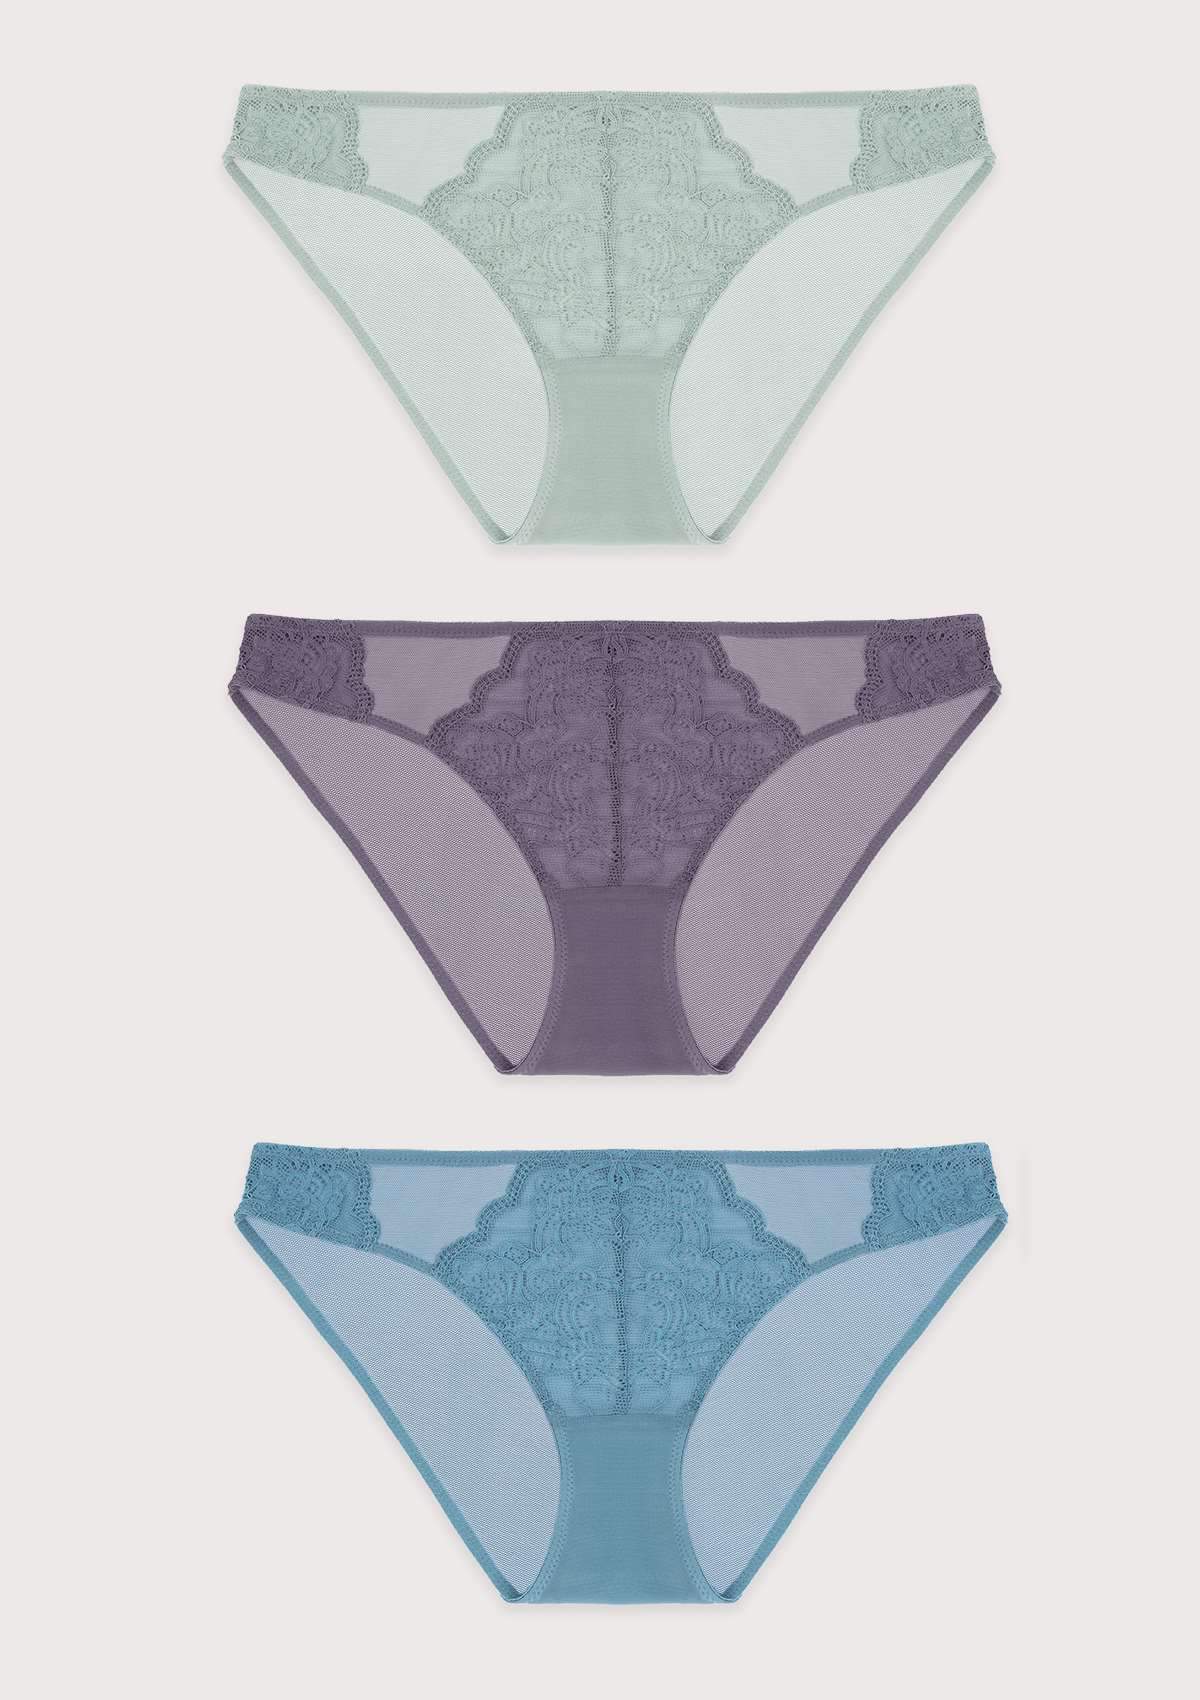 HSIA Floral Lace Front And Sheer Mesh Back Airy Bikini Panties -3 Pack - L / Green+Purple+Blue